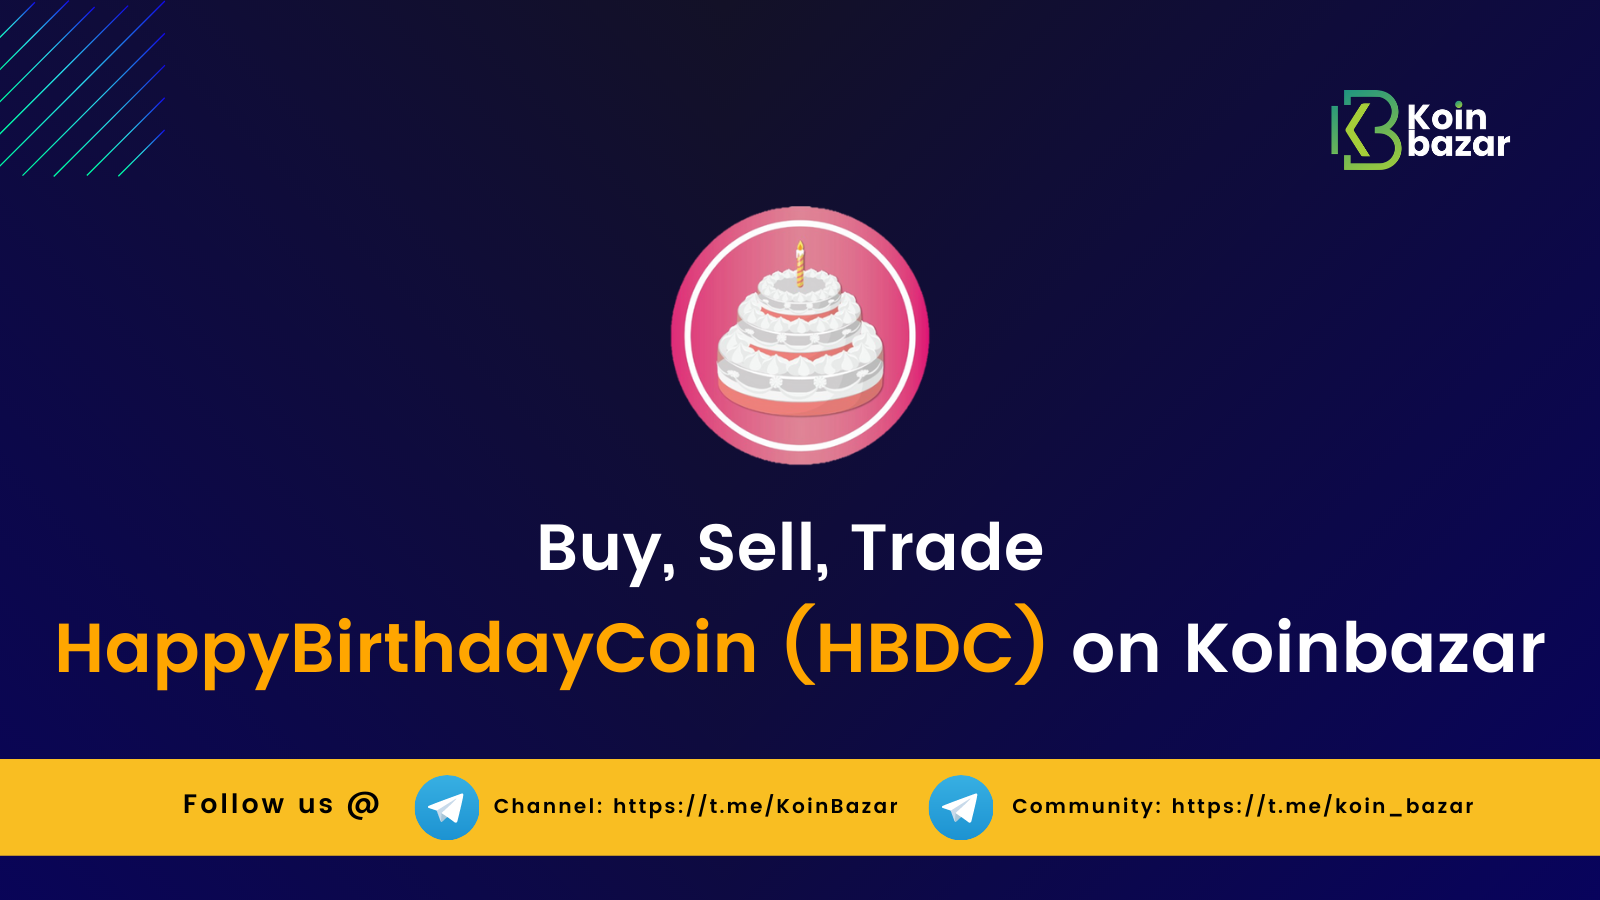 Buy, Sell, and Trade HappyBirthdayCoin (HBDC) on Koinbazar